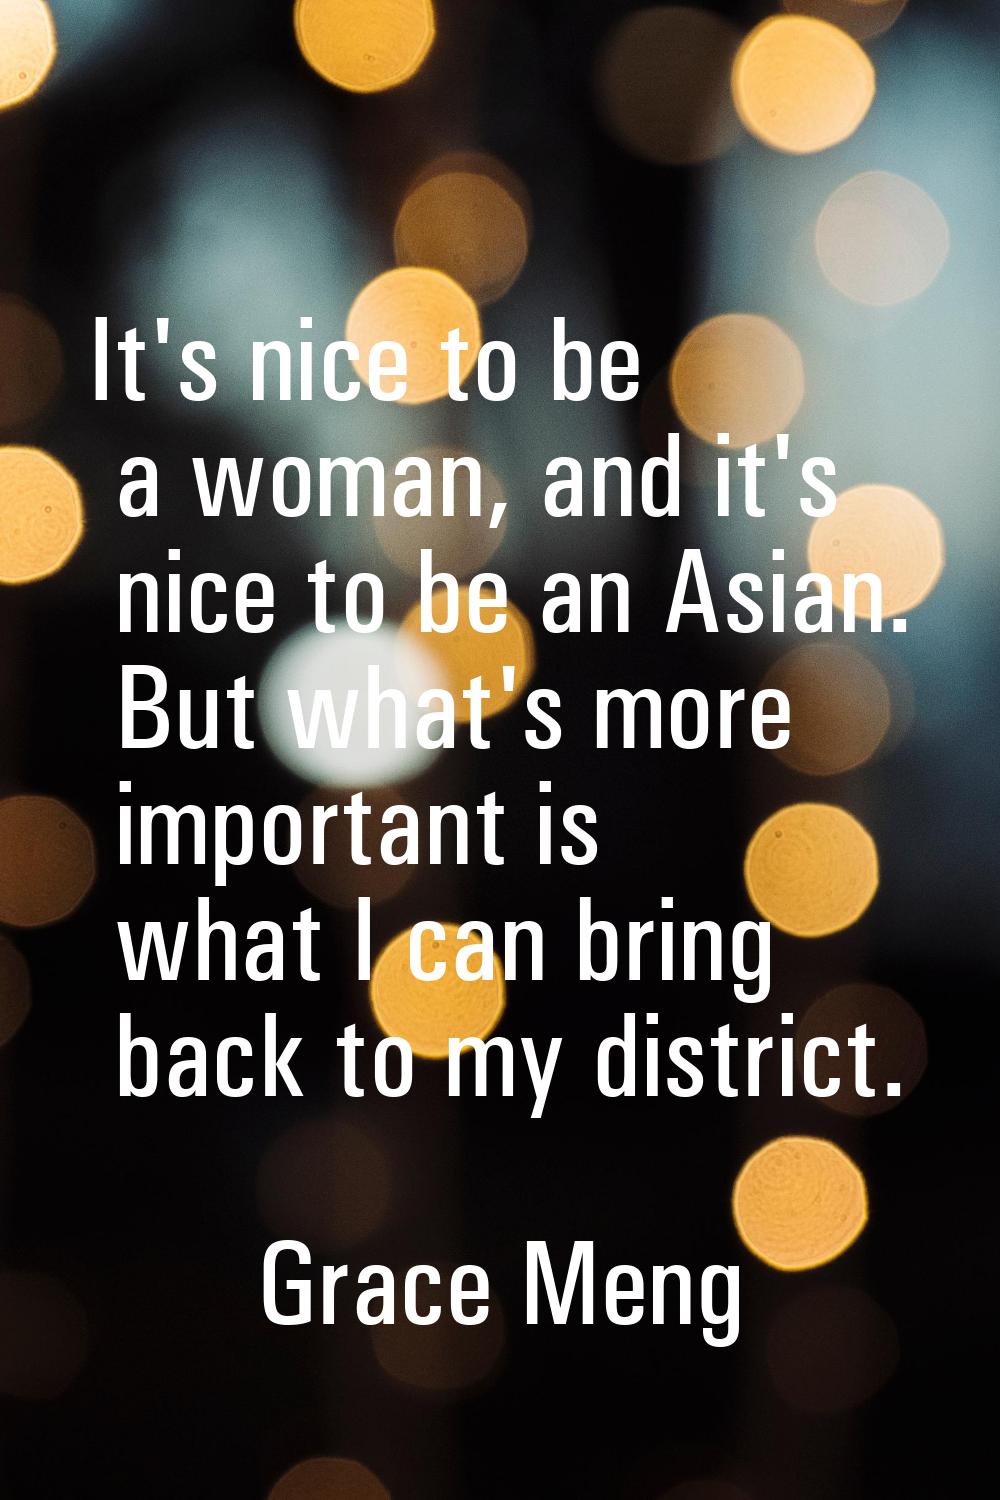 It's nice to be a woman, and it's nice to be an Asian. But what's more important is what I can brin